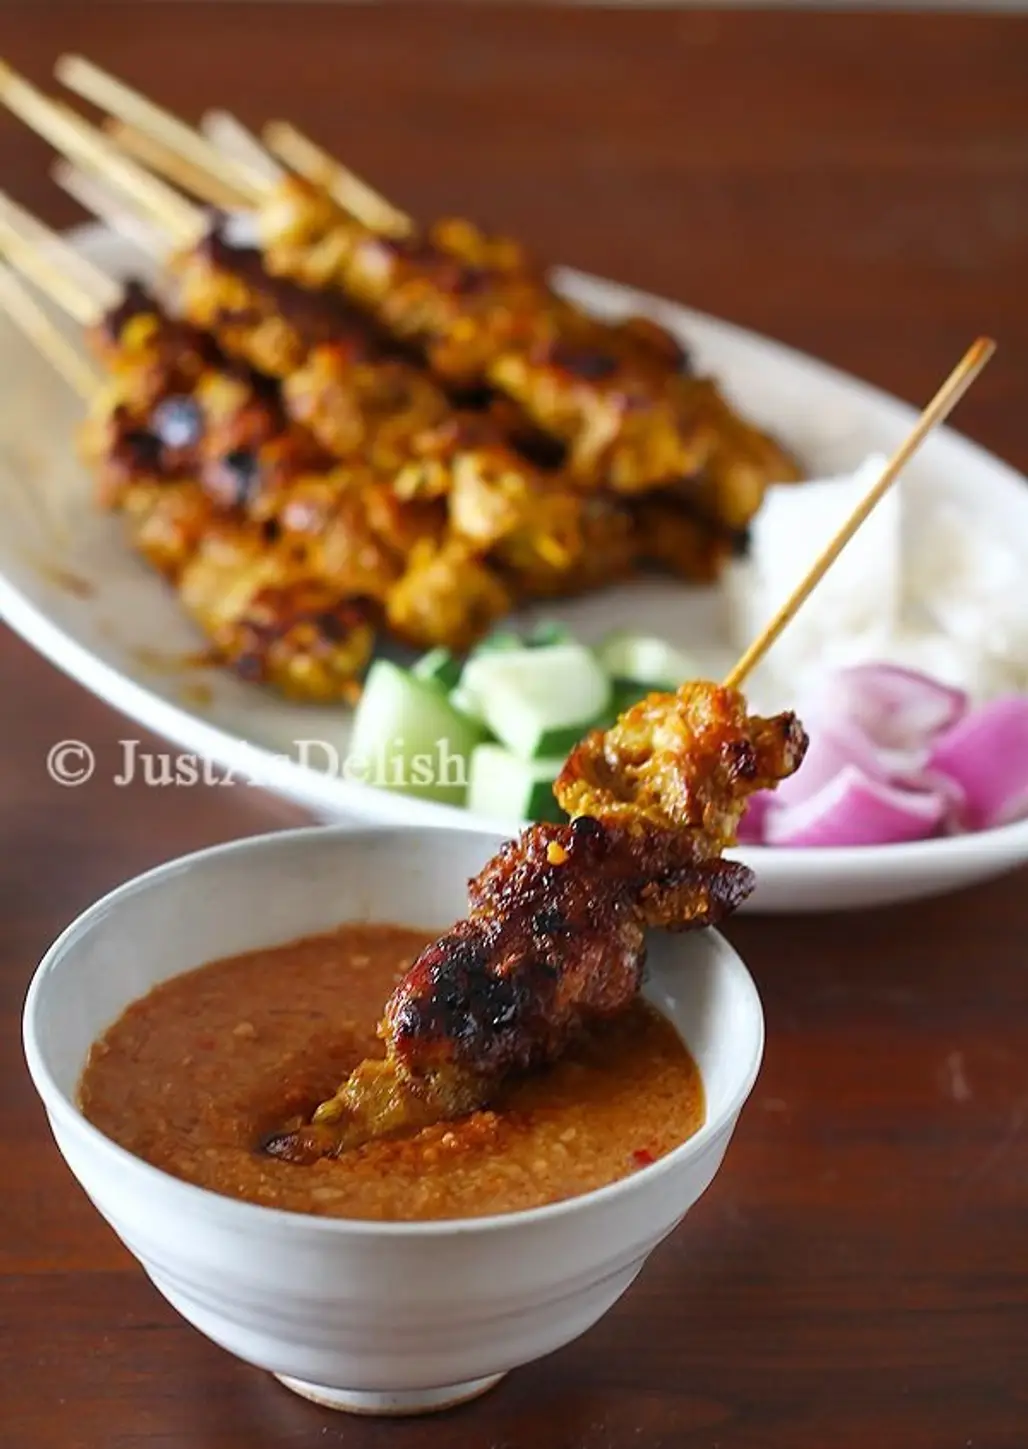 Satay - Grilled Marinated Skewered Meat with Spicy Peanut Sauce